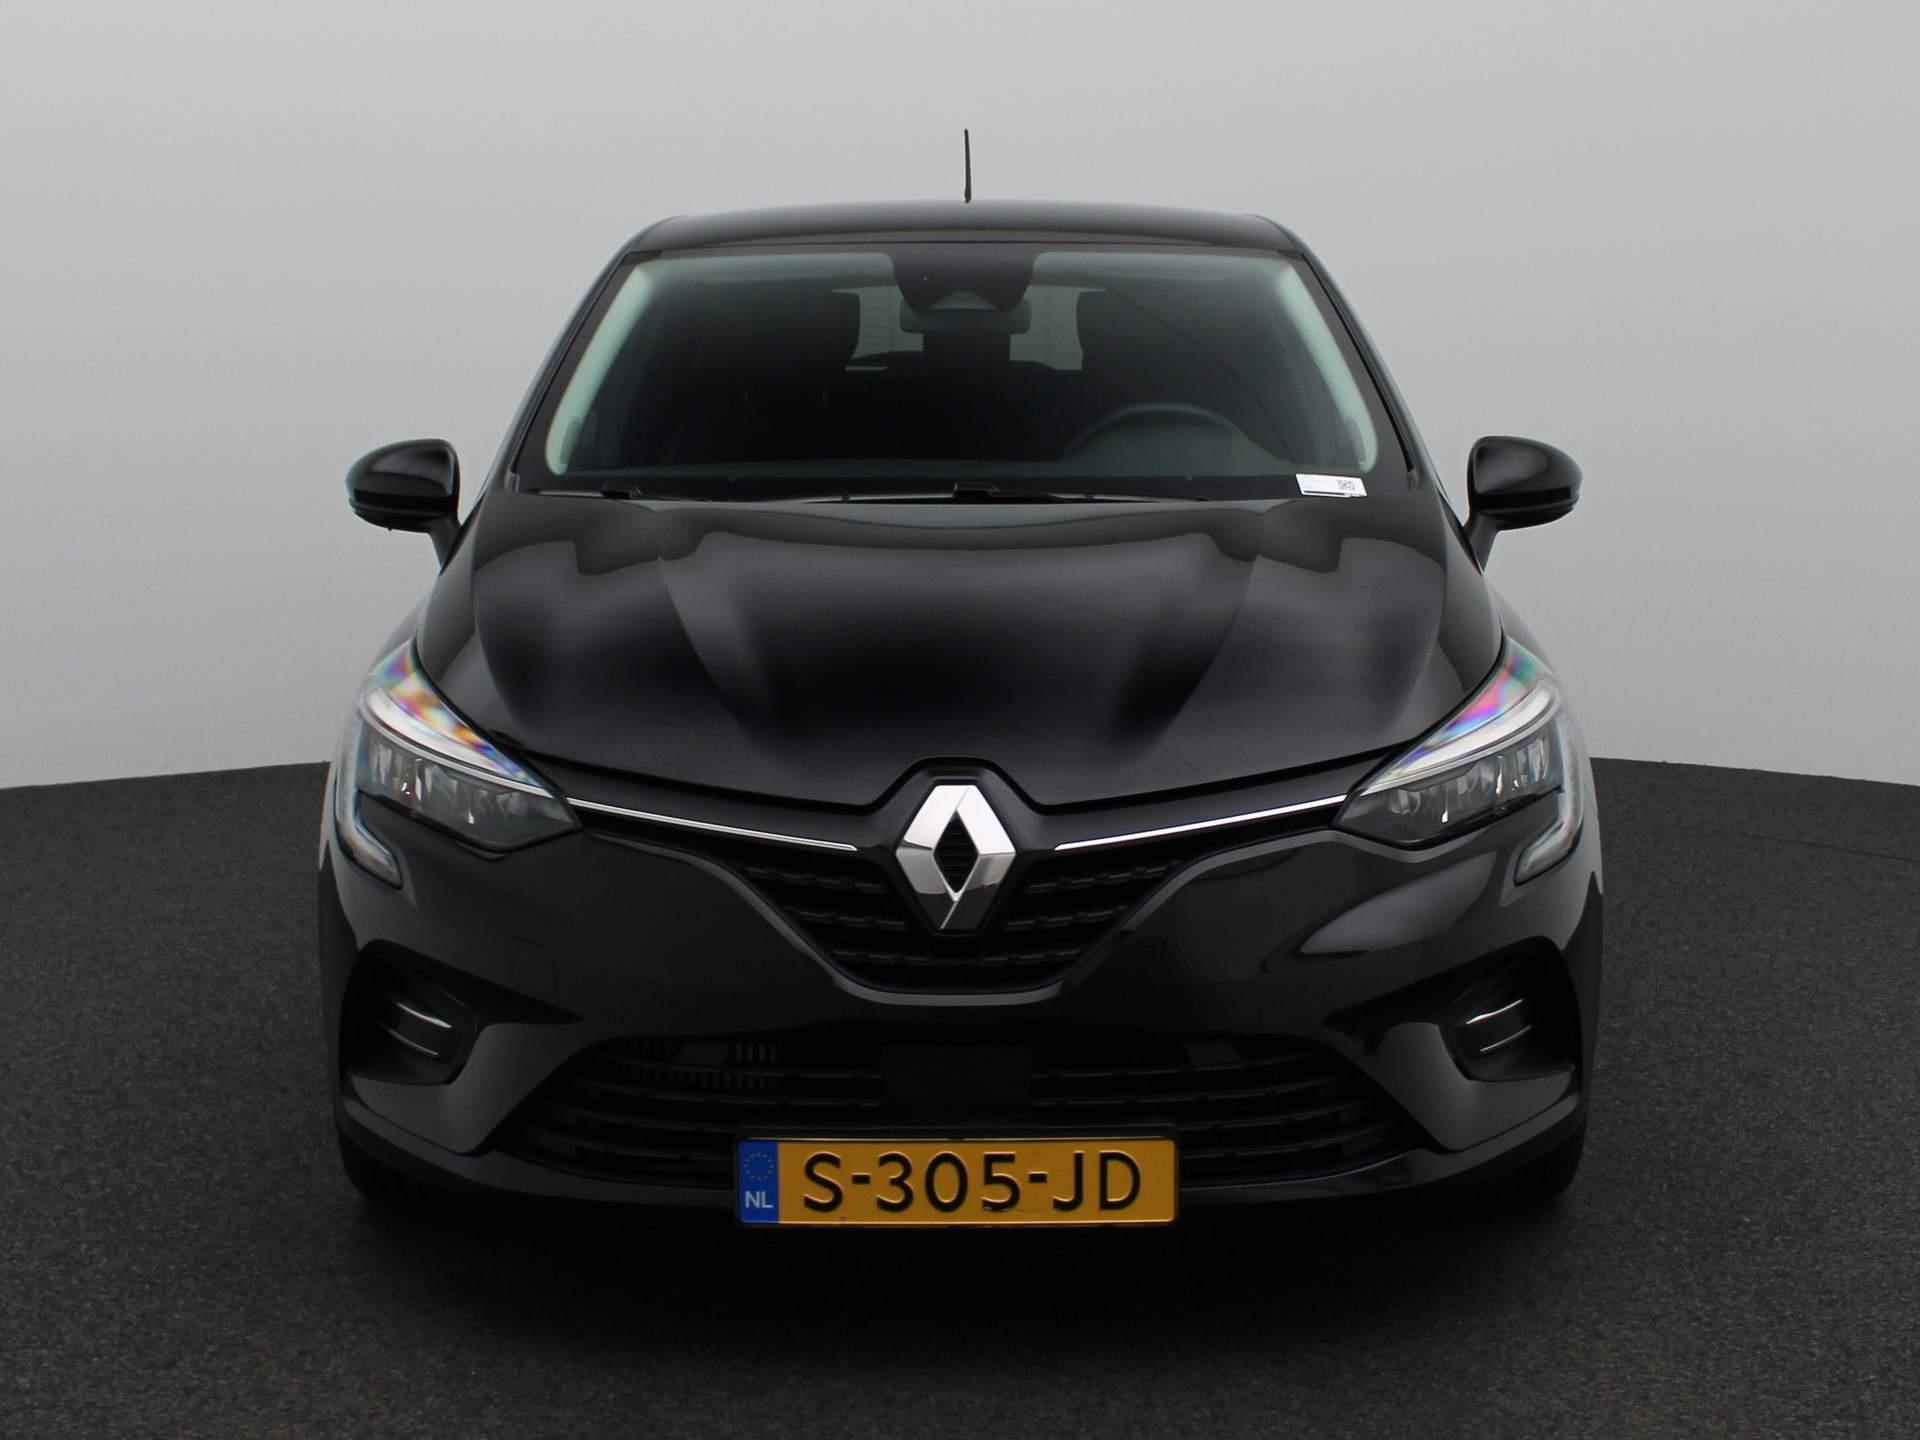 Renault Clio 1.0 TCe 90 Evolution | Climate Control | Full-Map Navigatie | Privacy Glass | PDC Achter | Keyless | 16" LMV | Apple Carplay & Android Auto - 3/35